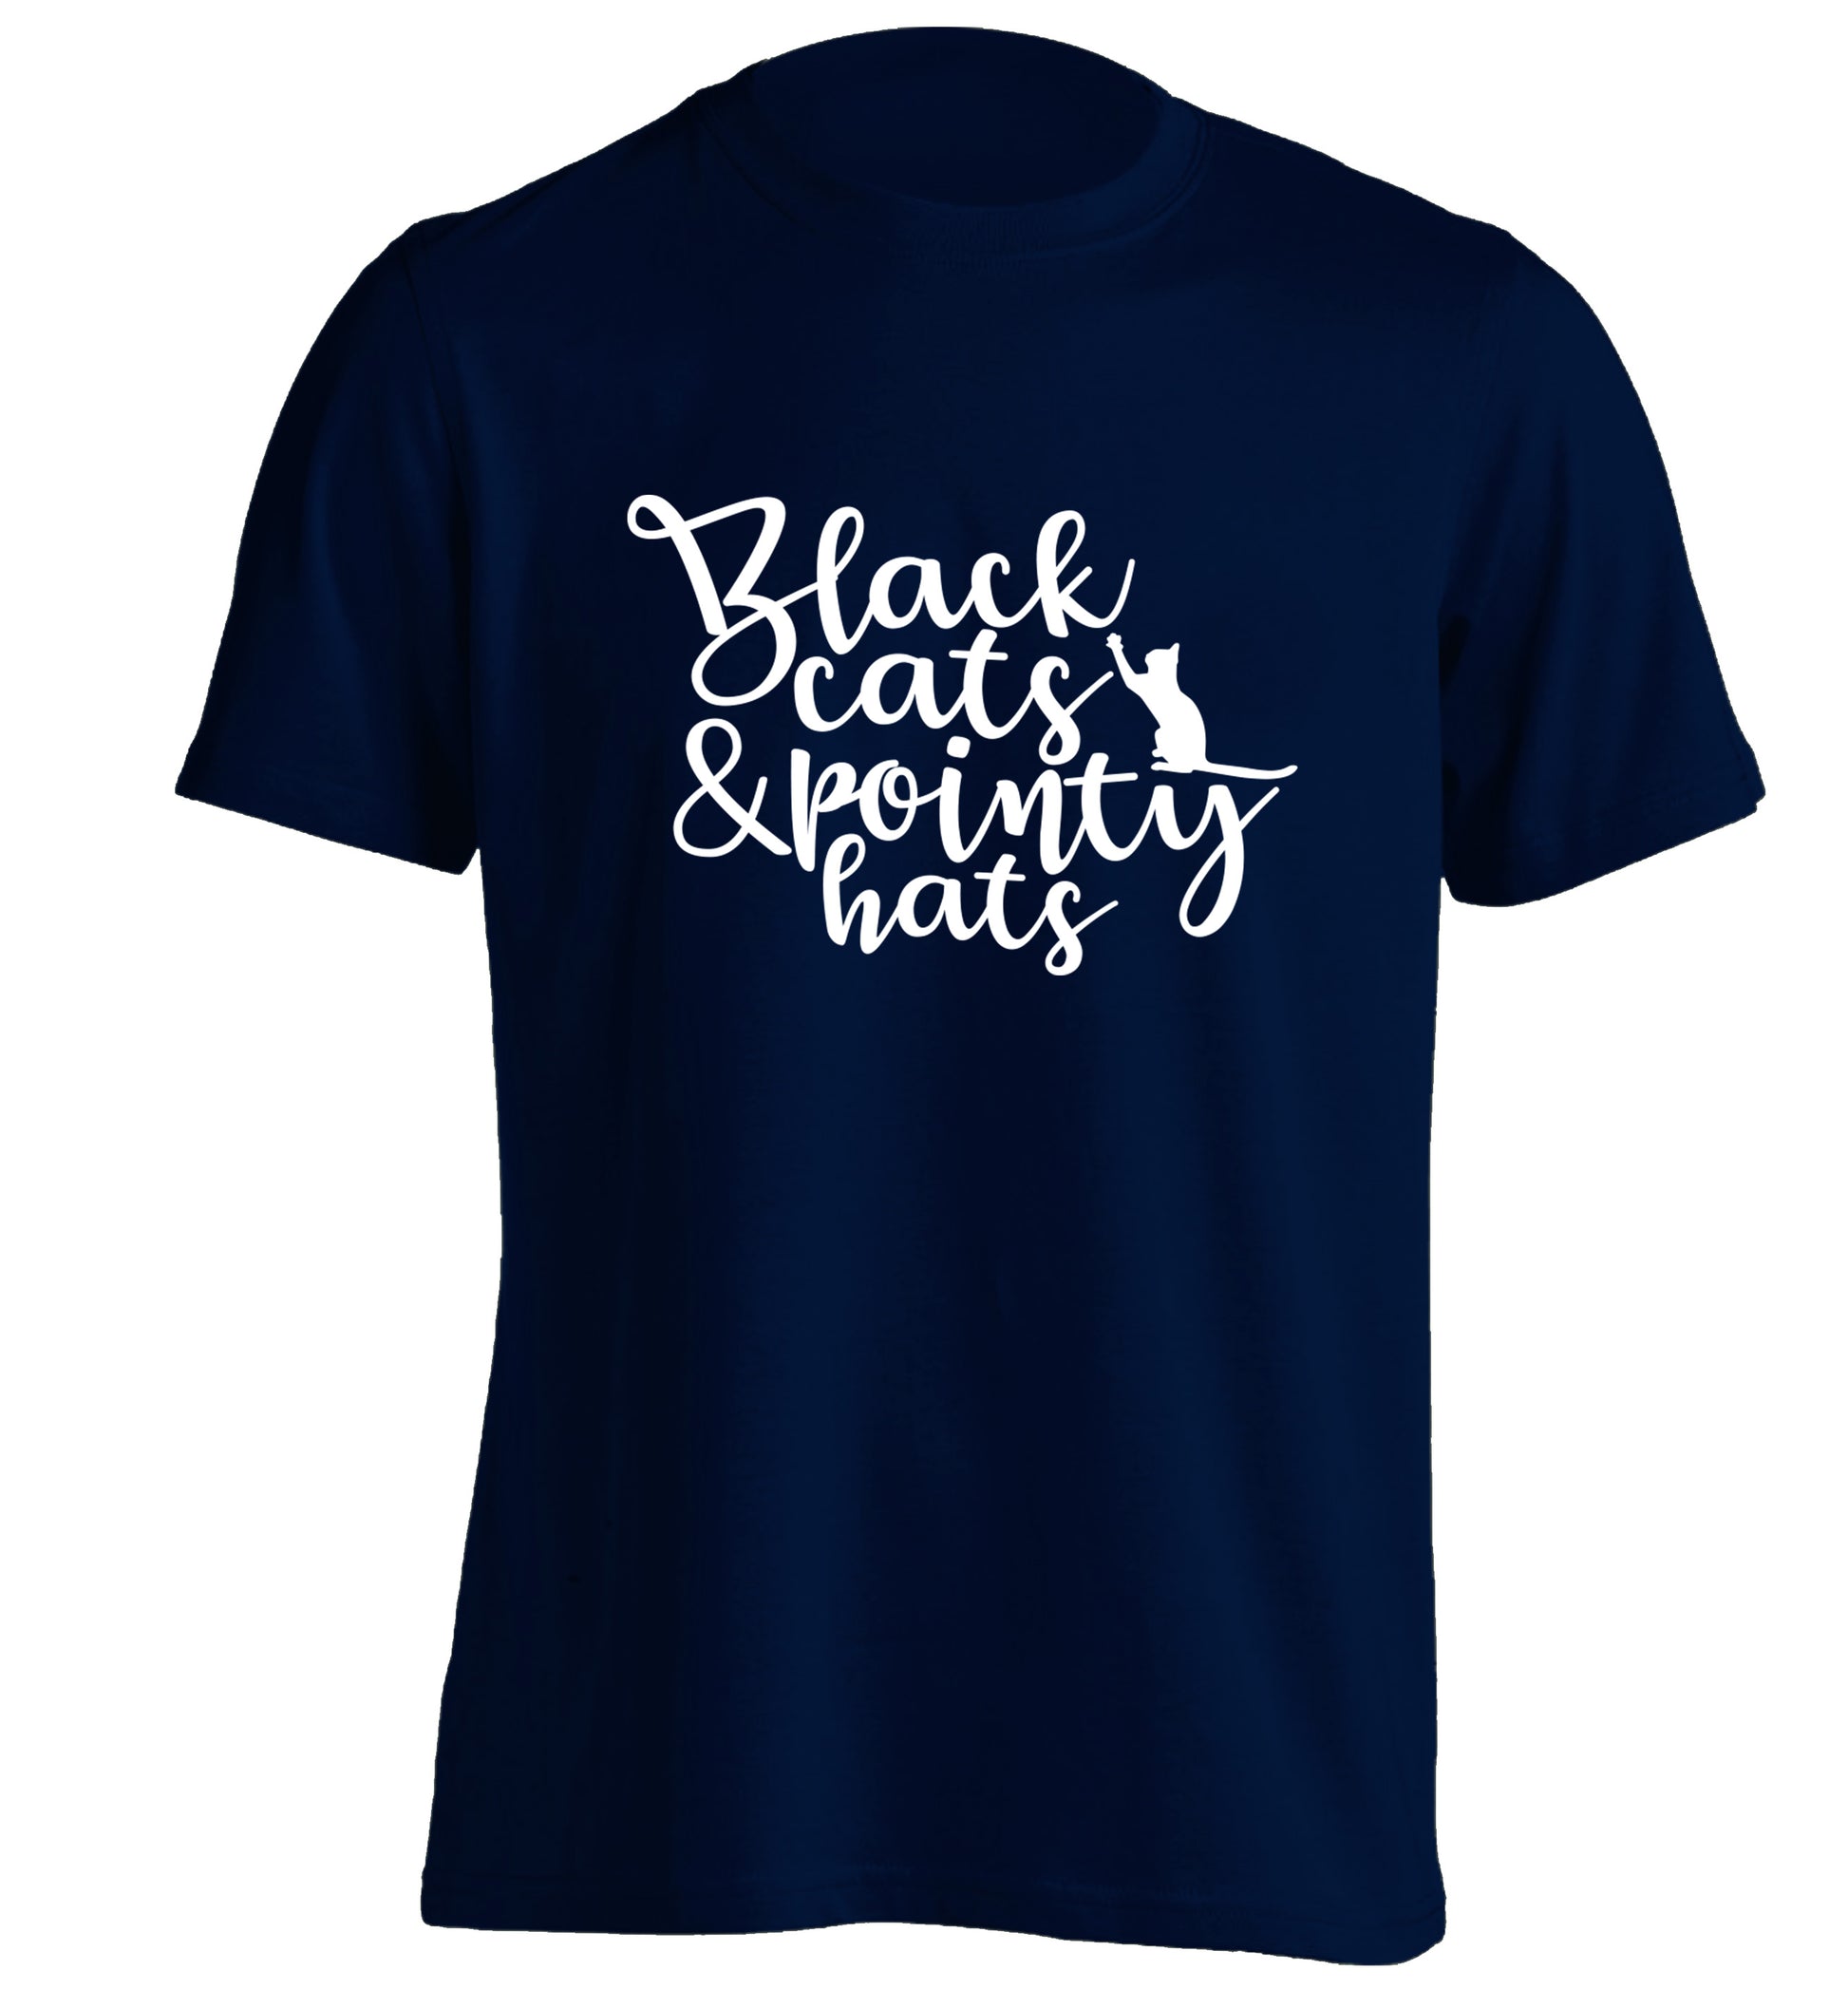 Black cats and pointy hats adults unisex navy Tshirt 2XL